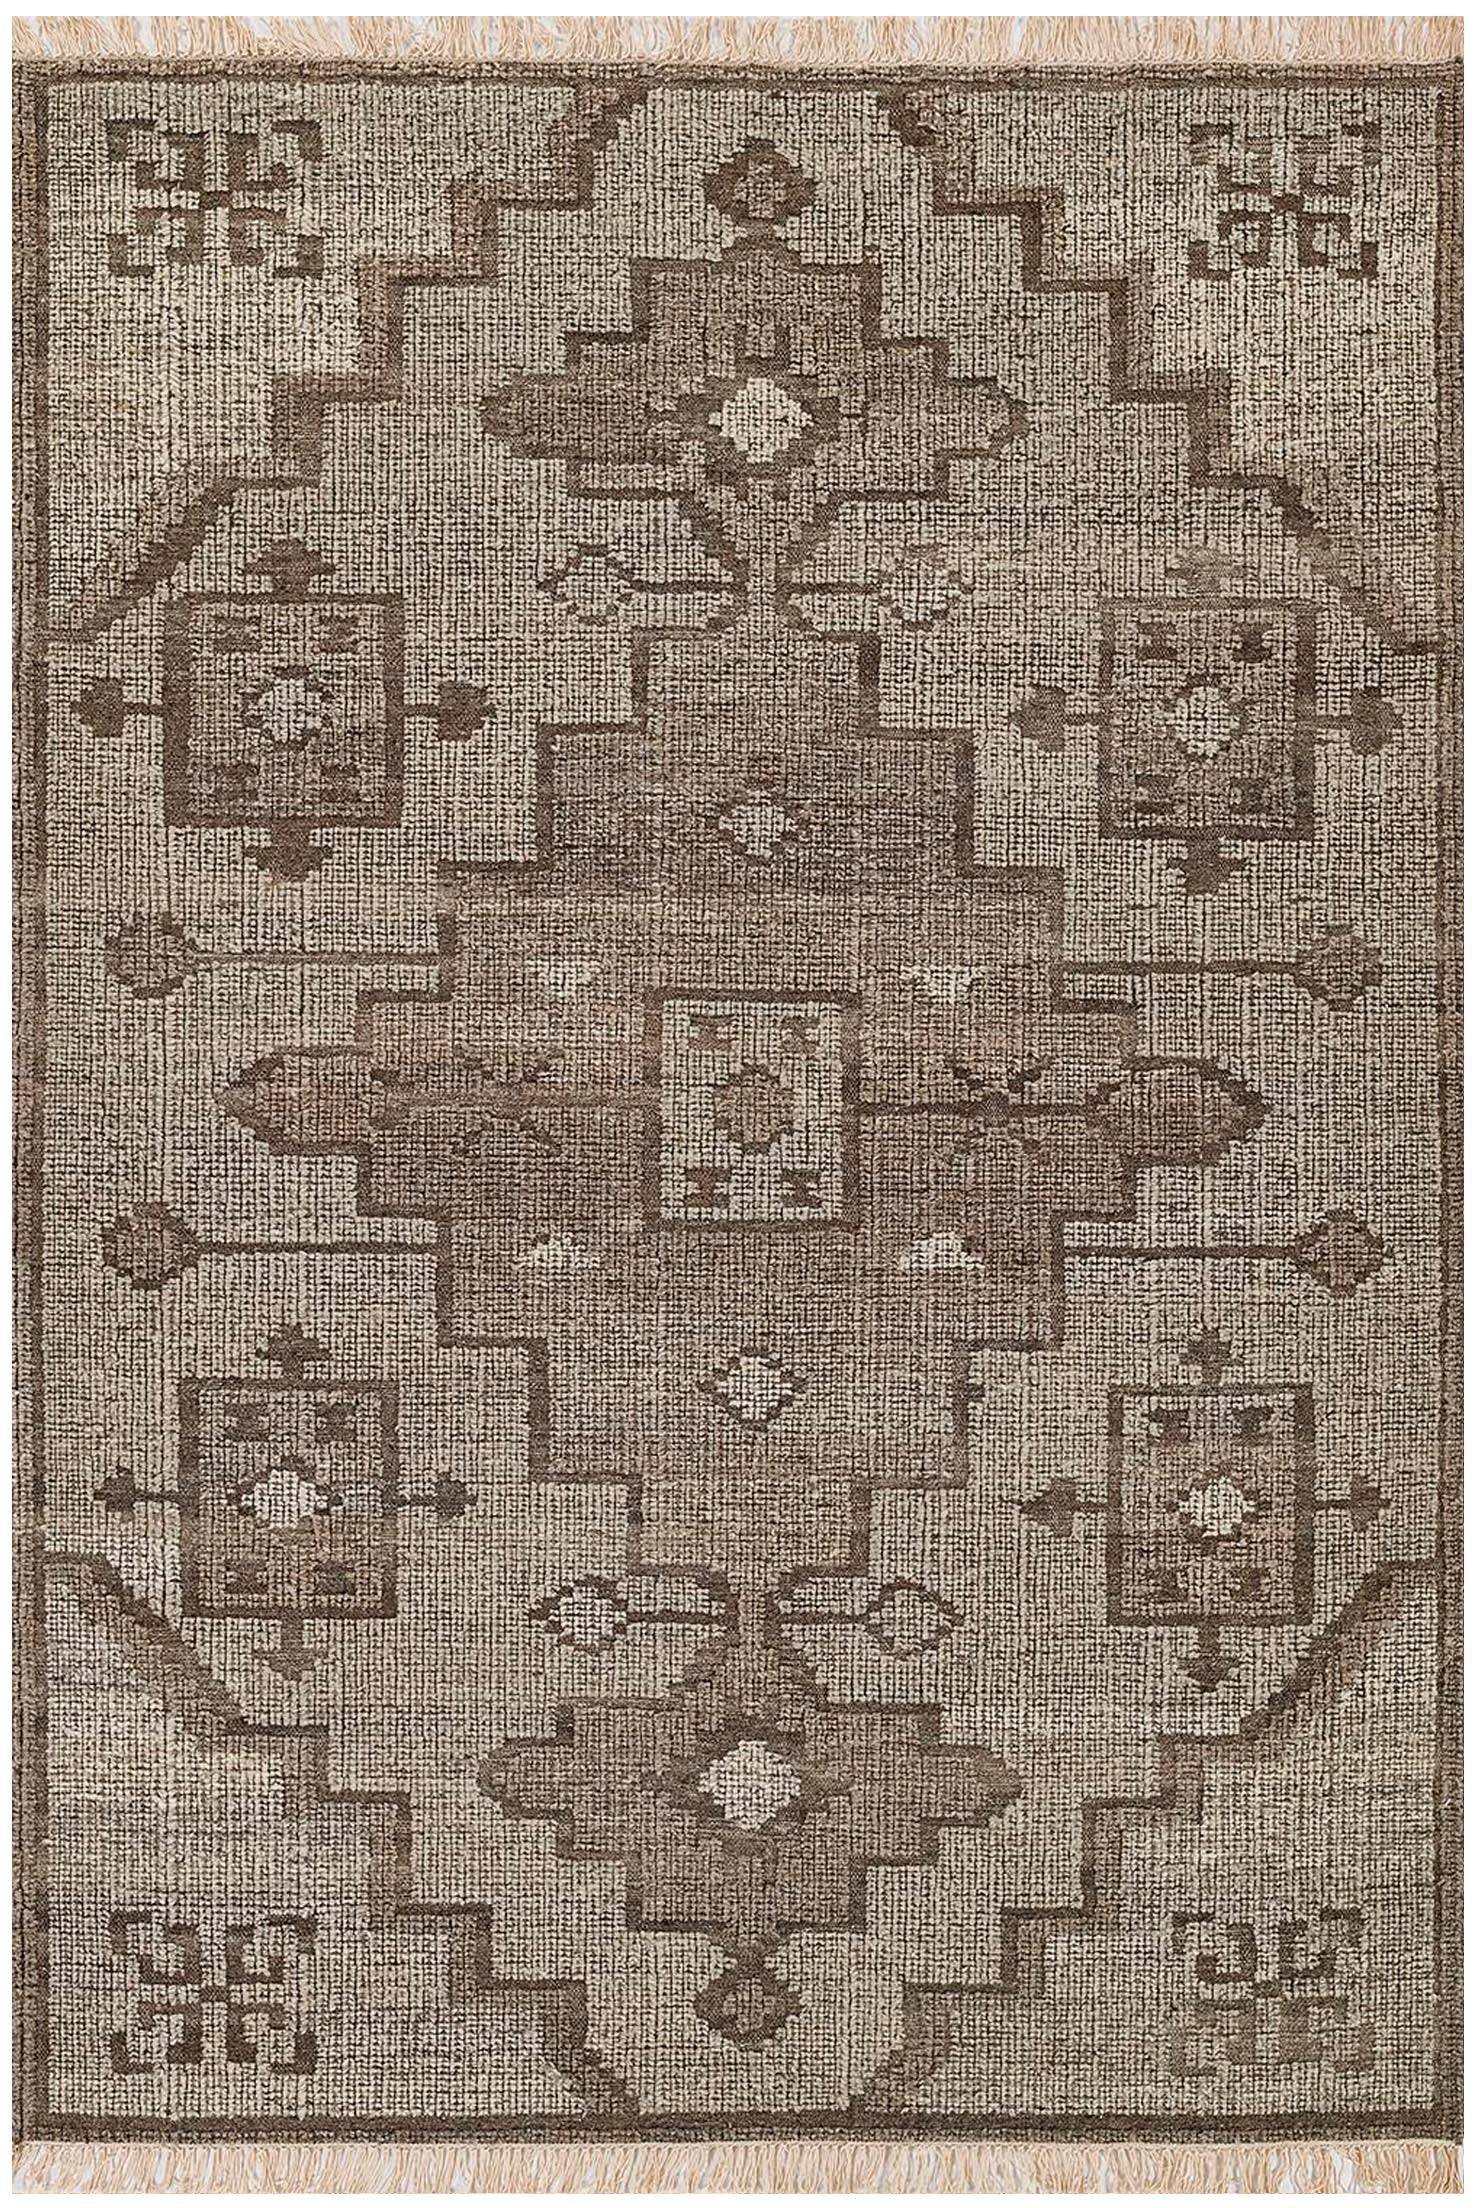 Moroccan Hand Woven Wool & Cotton Natural Tone Area Rug